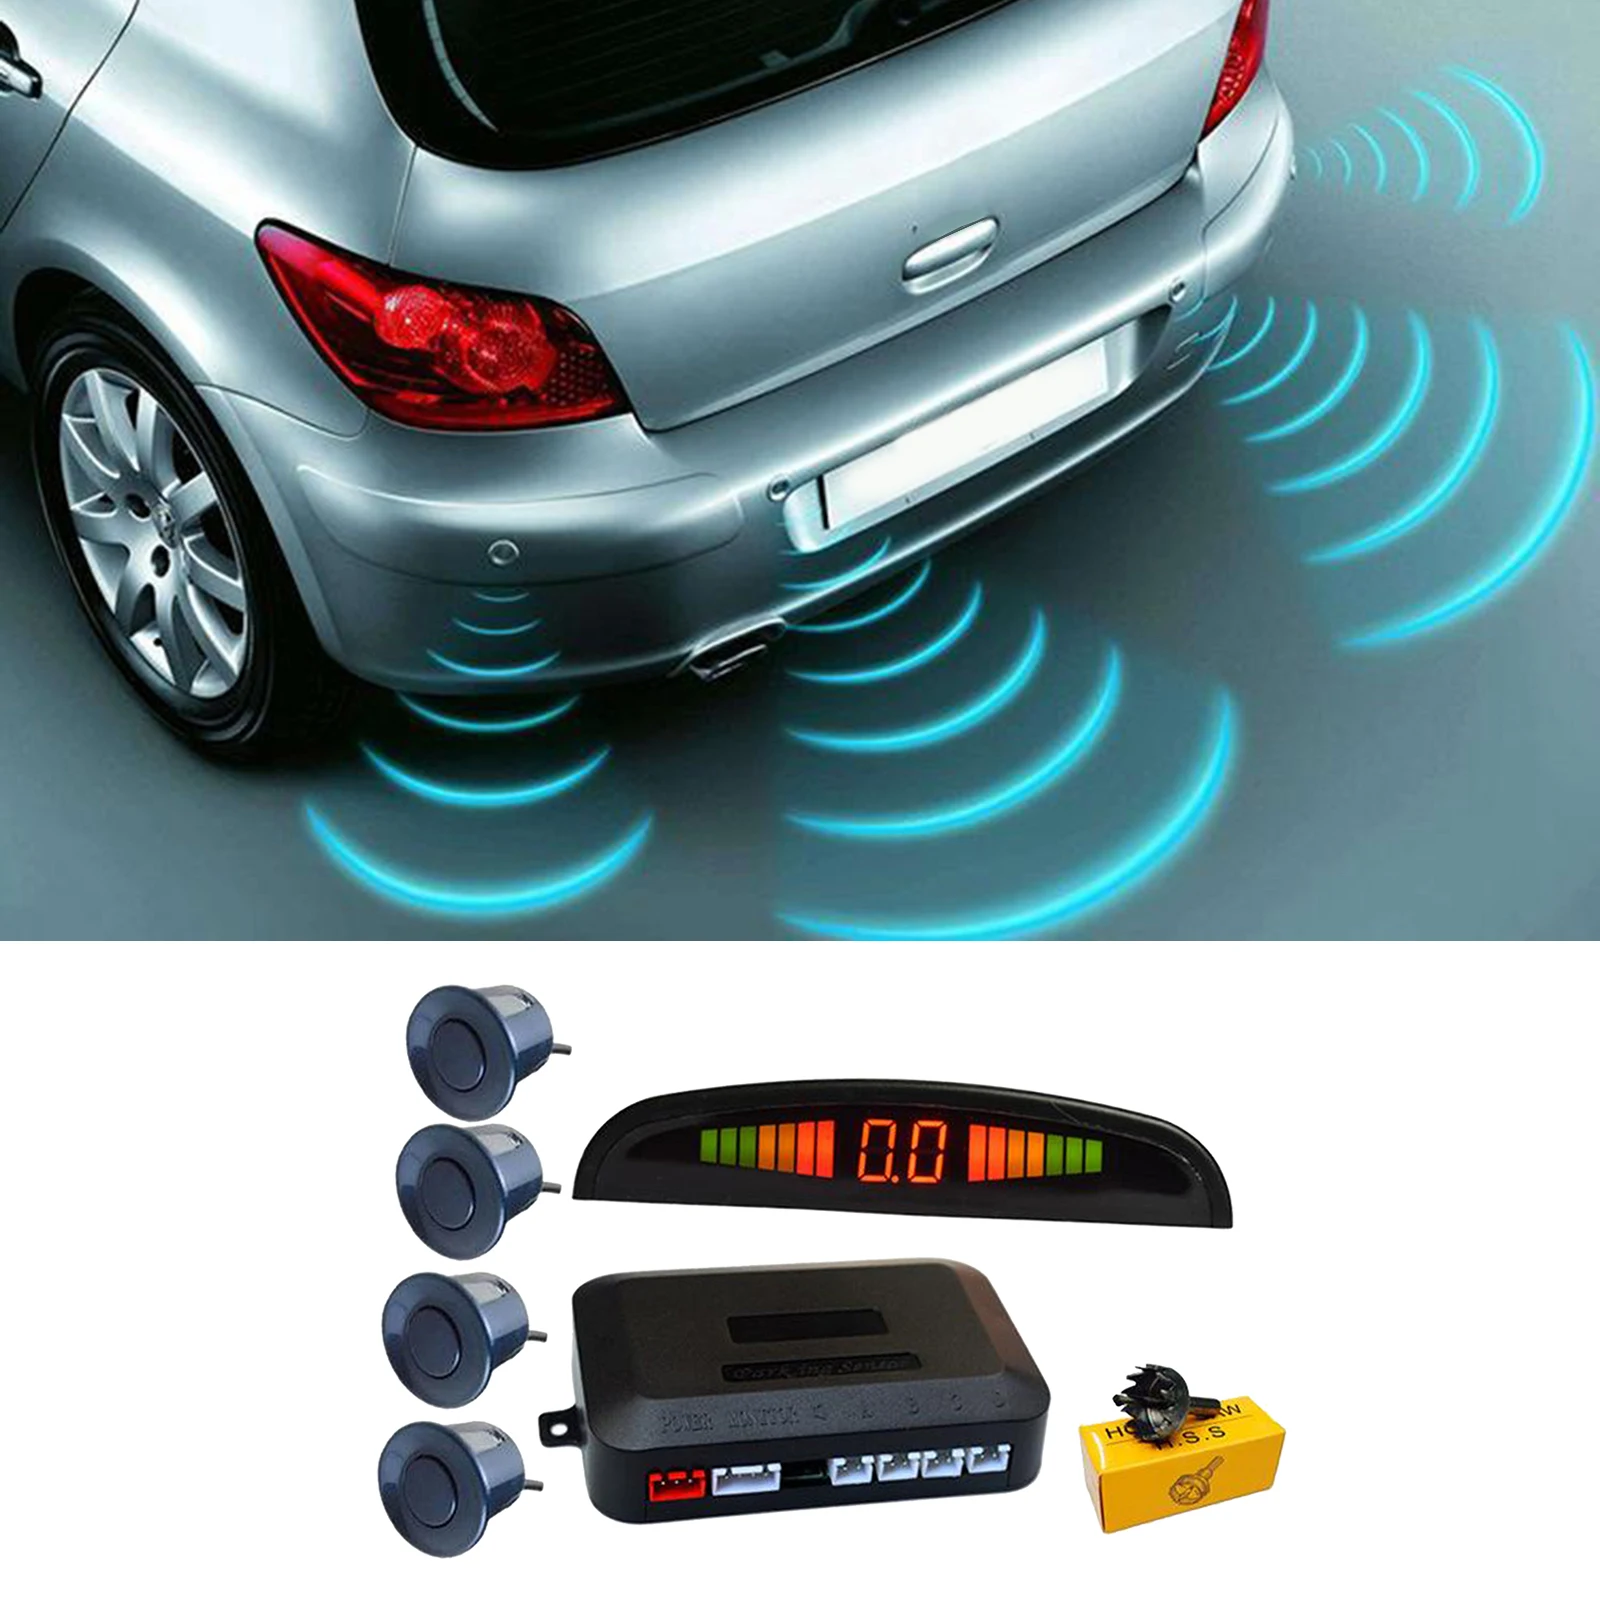 Car Auto Vehicle Reverse Backup  System with 4 Parking Sensors Distance Detection, LED Distance Display, Buzzer Warning